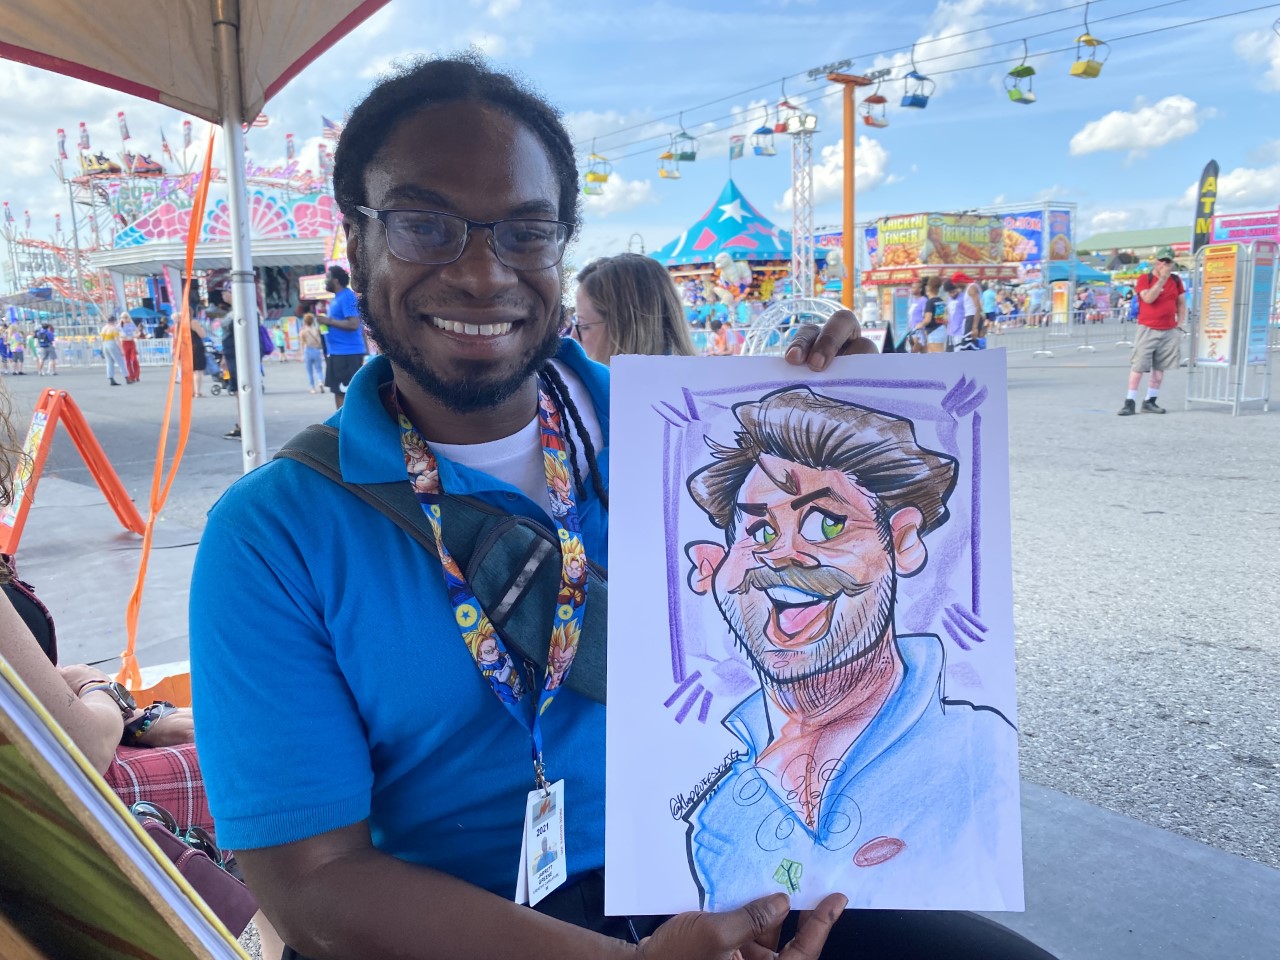 Caricature artist Jarrett Greene poses with one of his portraits at the New York State Fair.